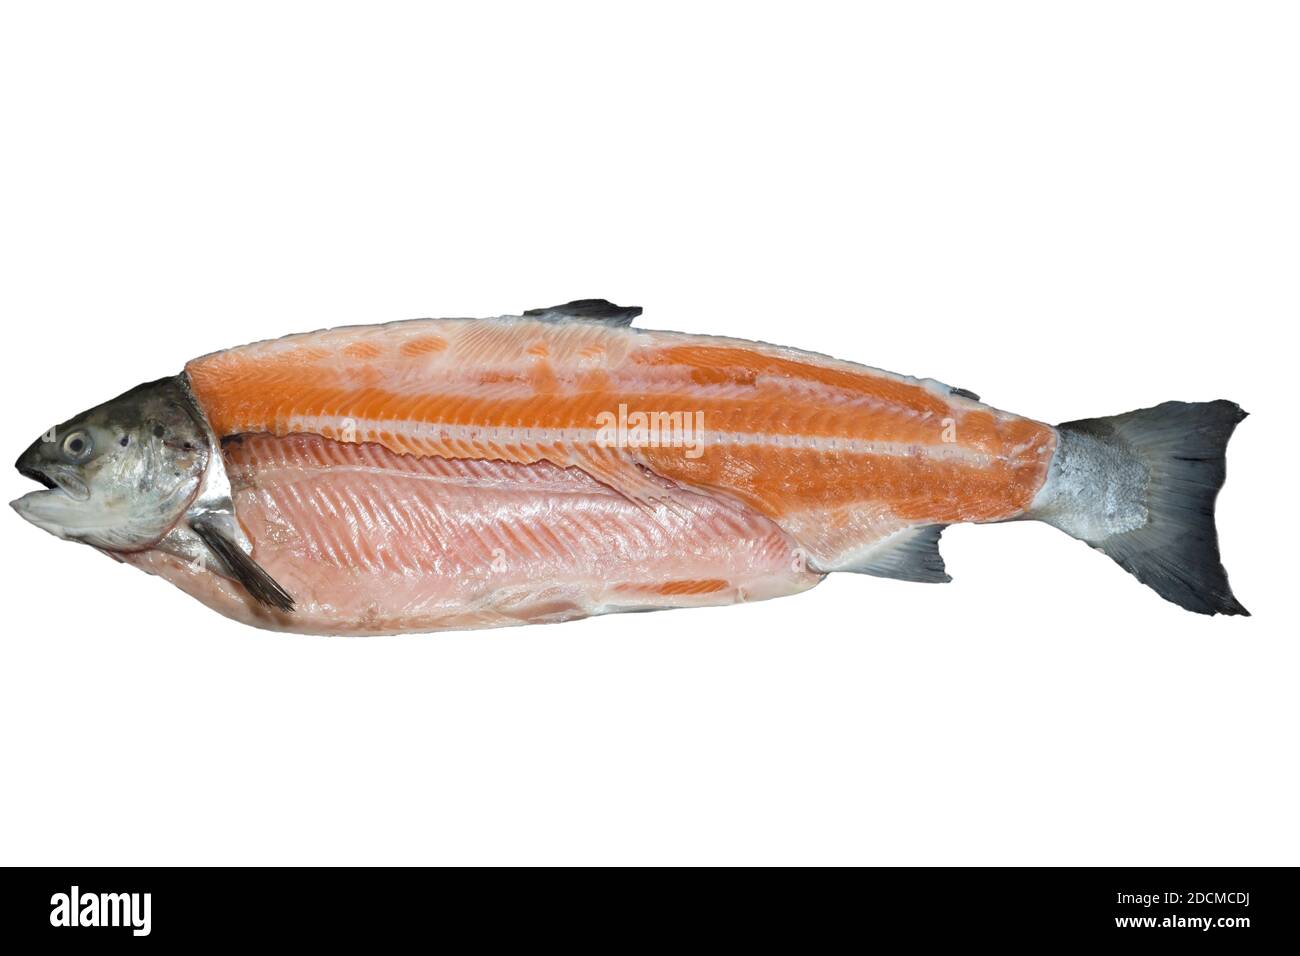 Salmon from aquaculture, Norway Stock Photo - Alamy